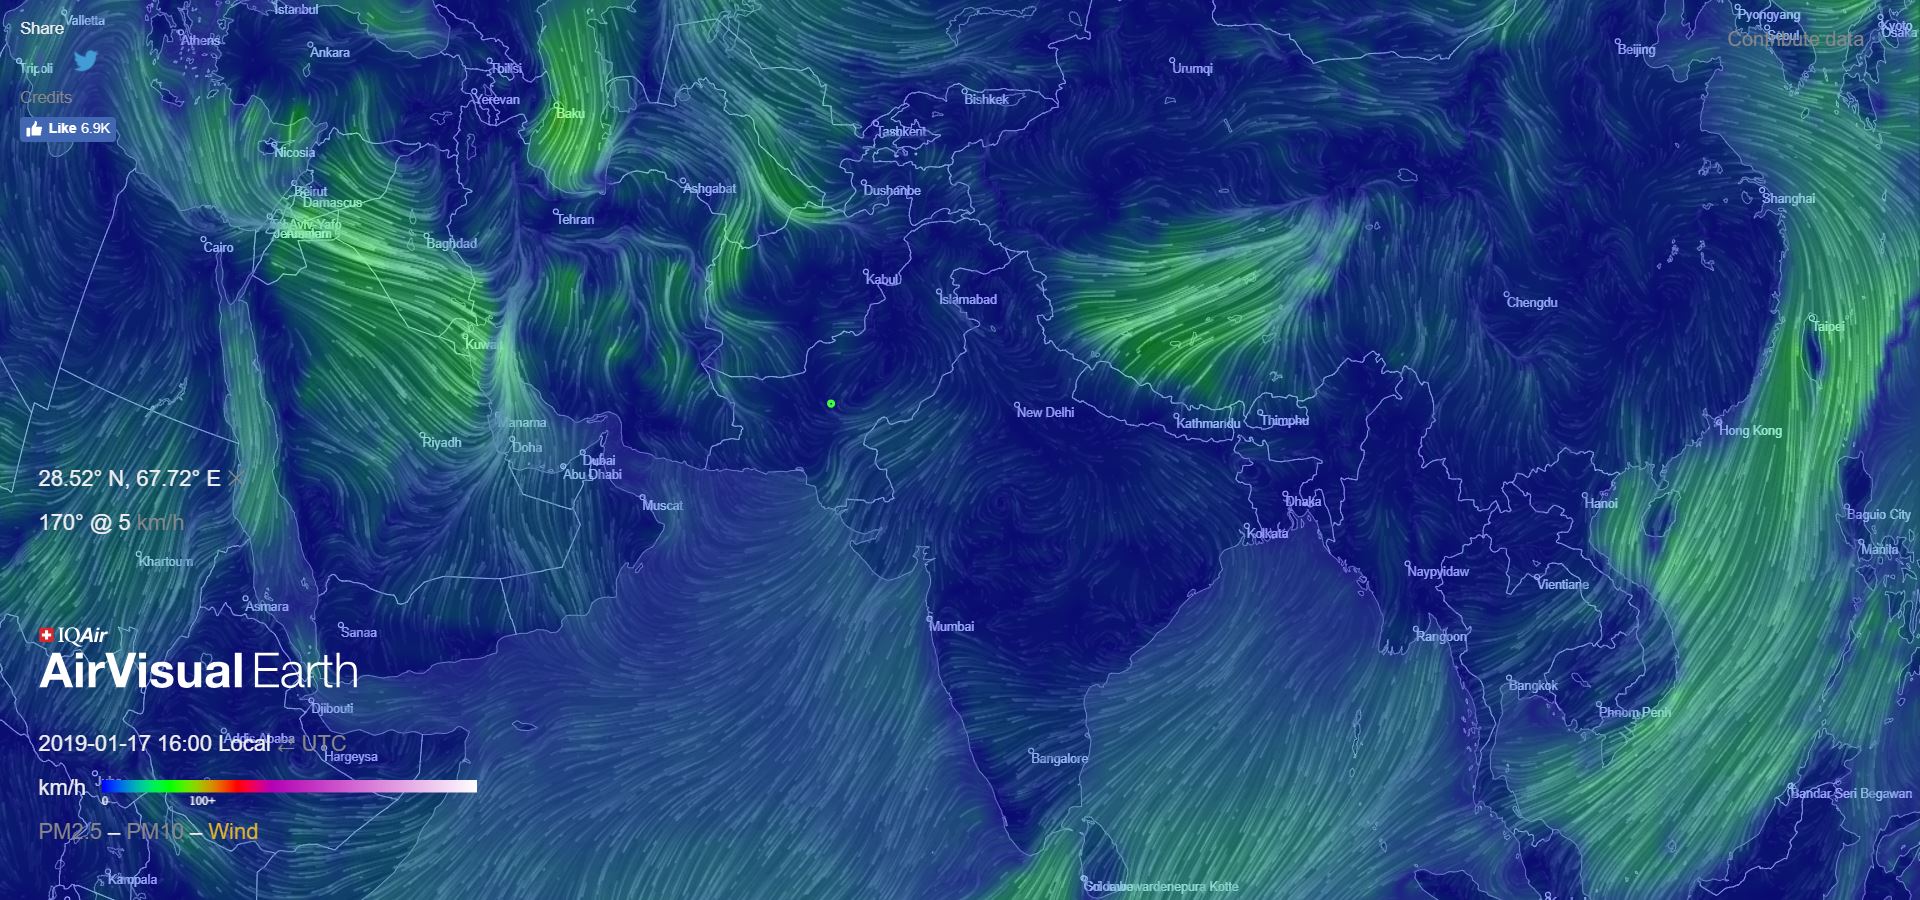 AirVisual Earth Shows Real Time Air Pollution in 3D Wind Data - Forestrypedia